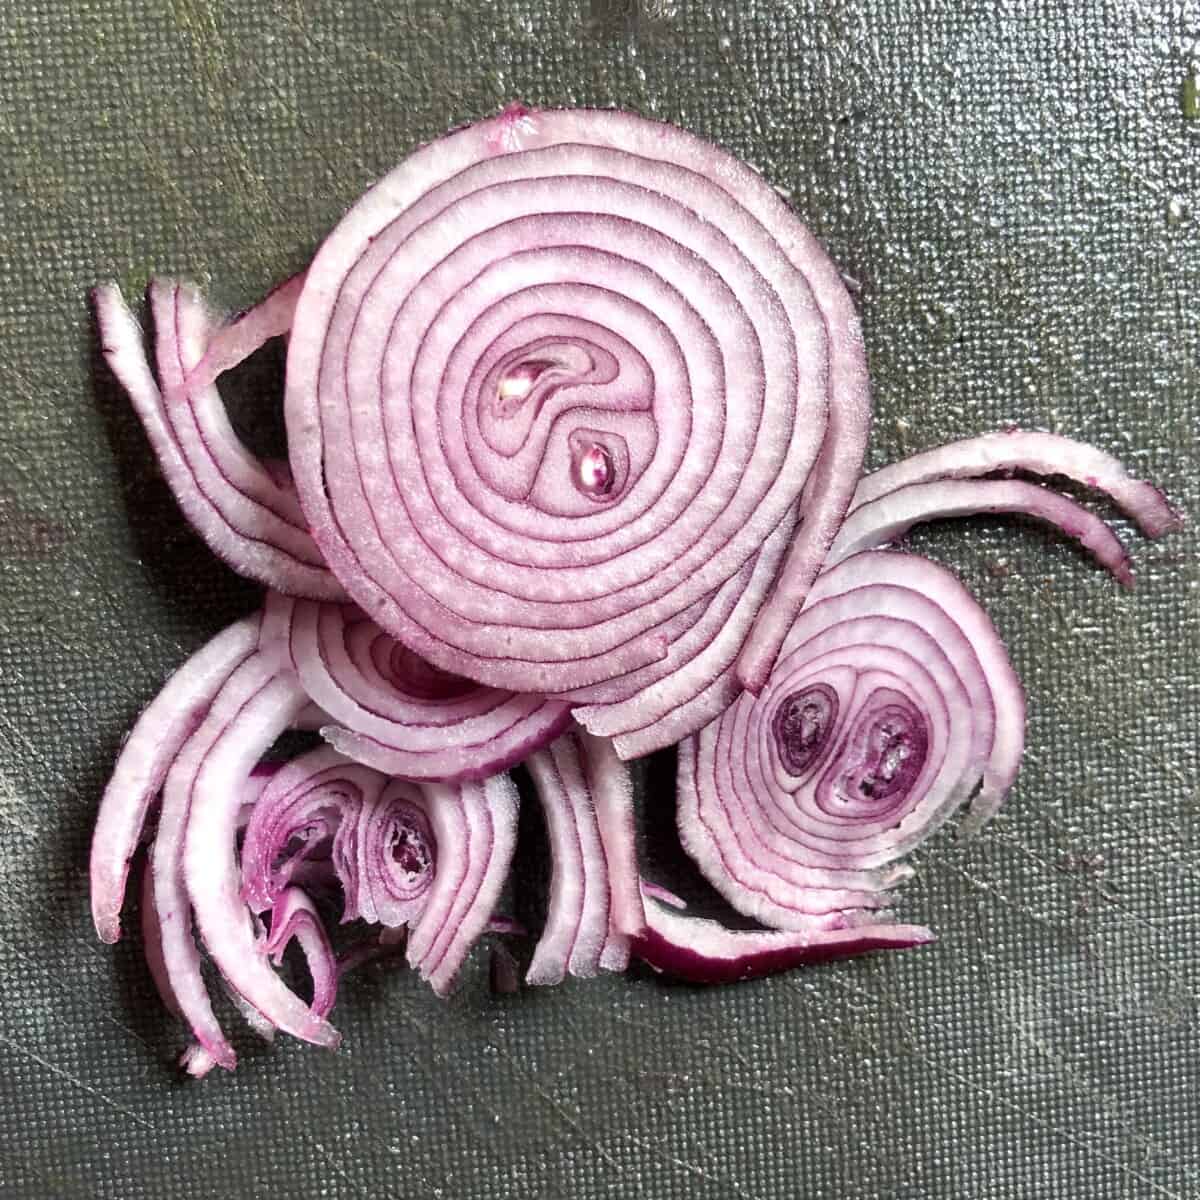 Paper thin sliced red onions.